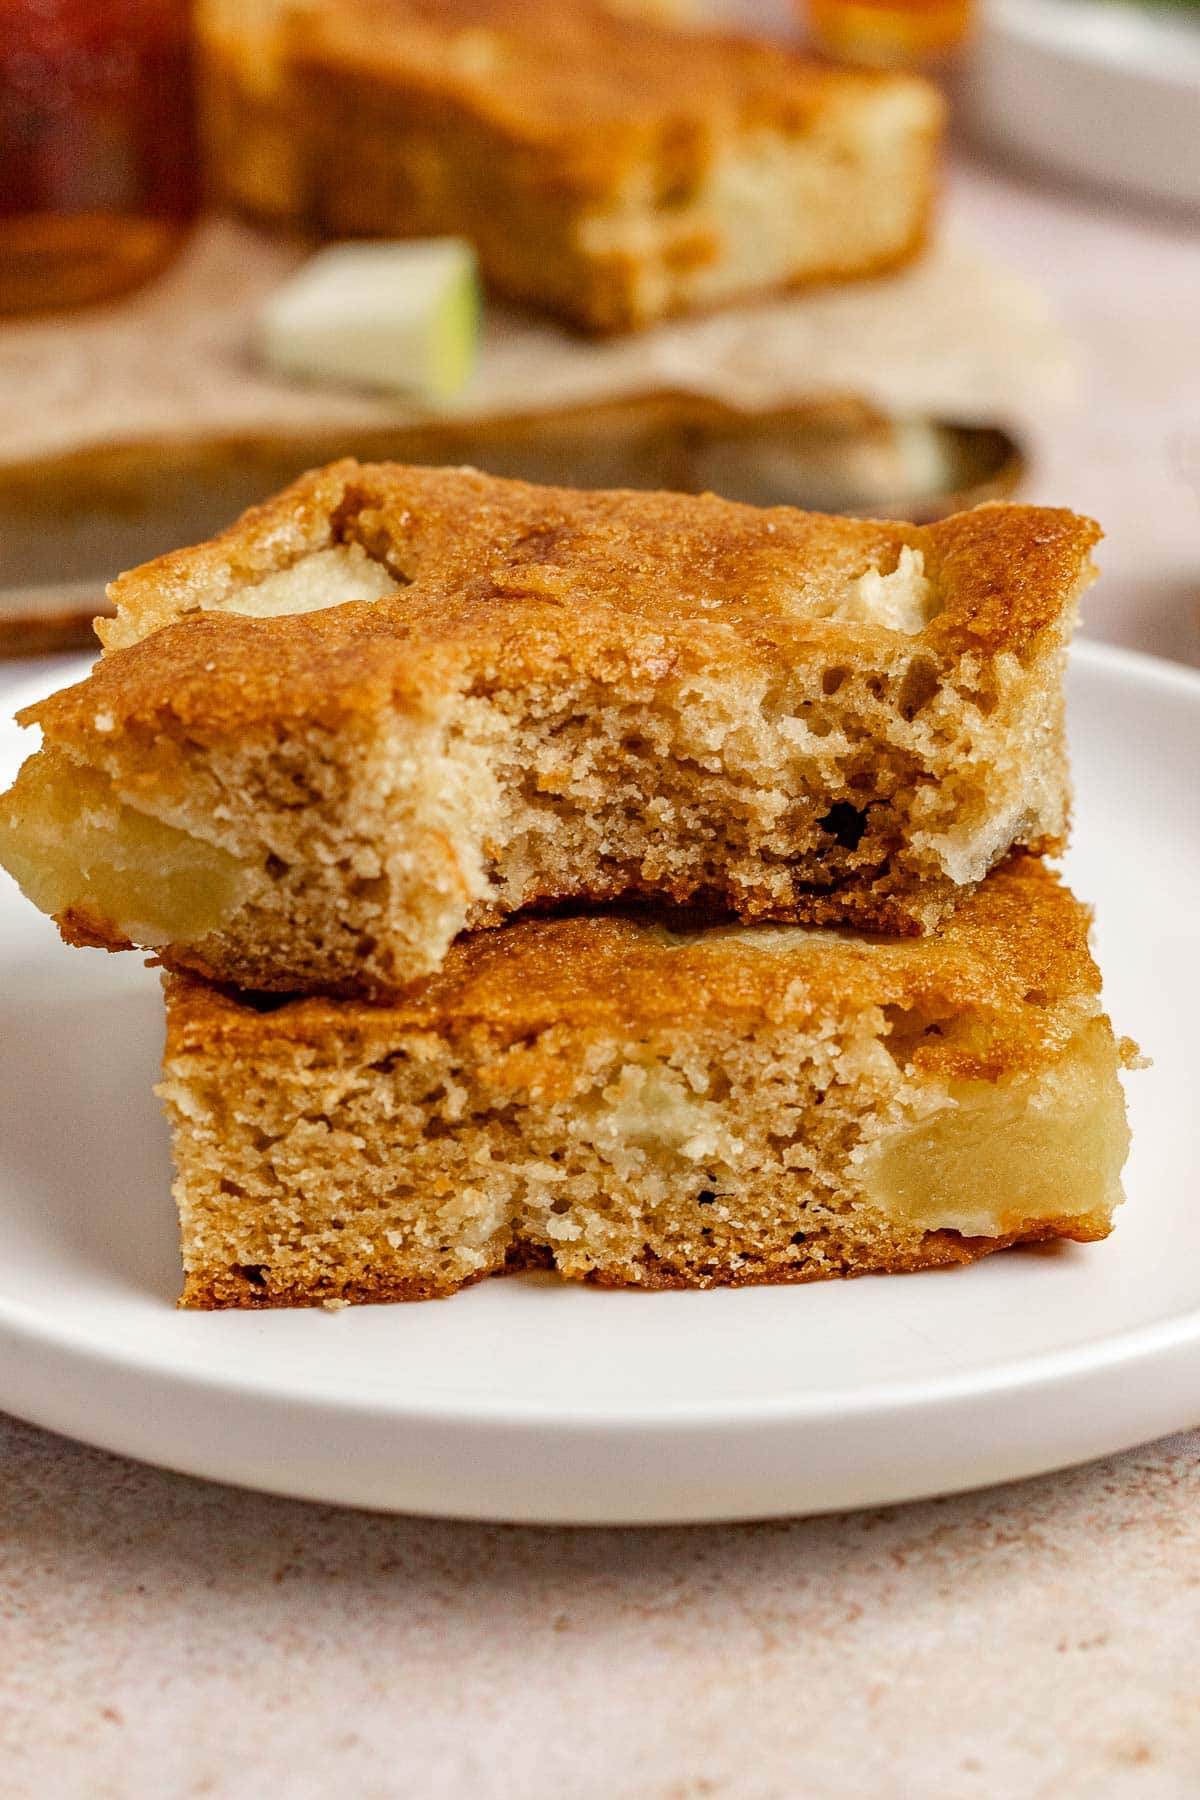 Maple Apple Bars stacked on serving plate showing interior